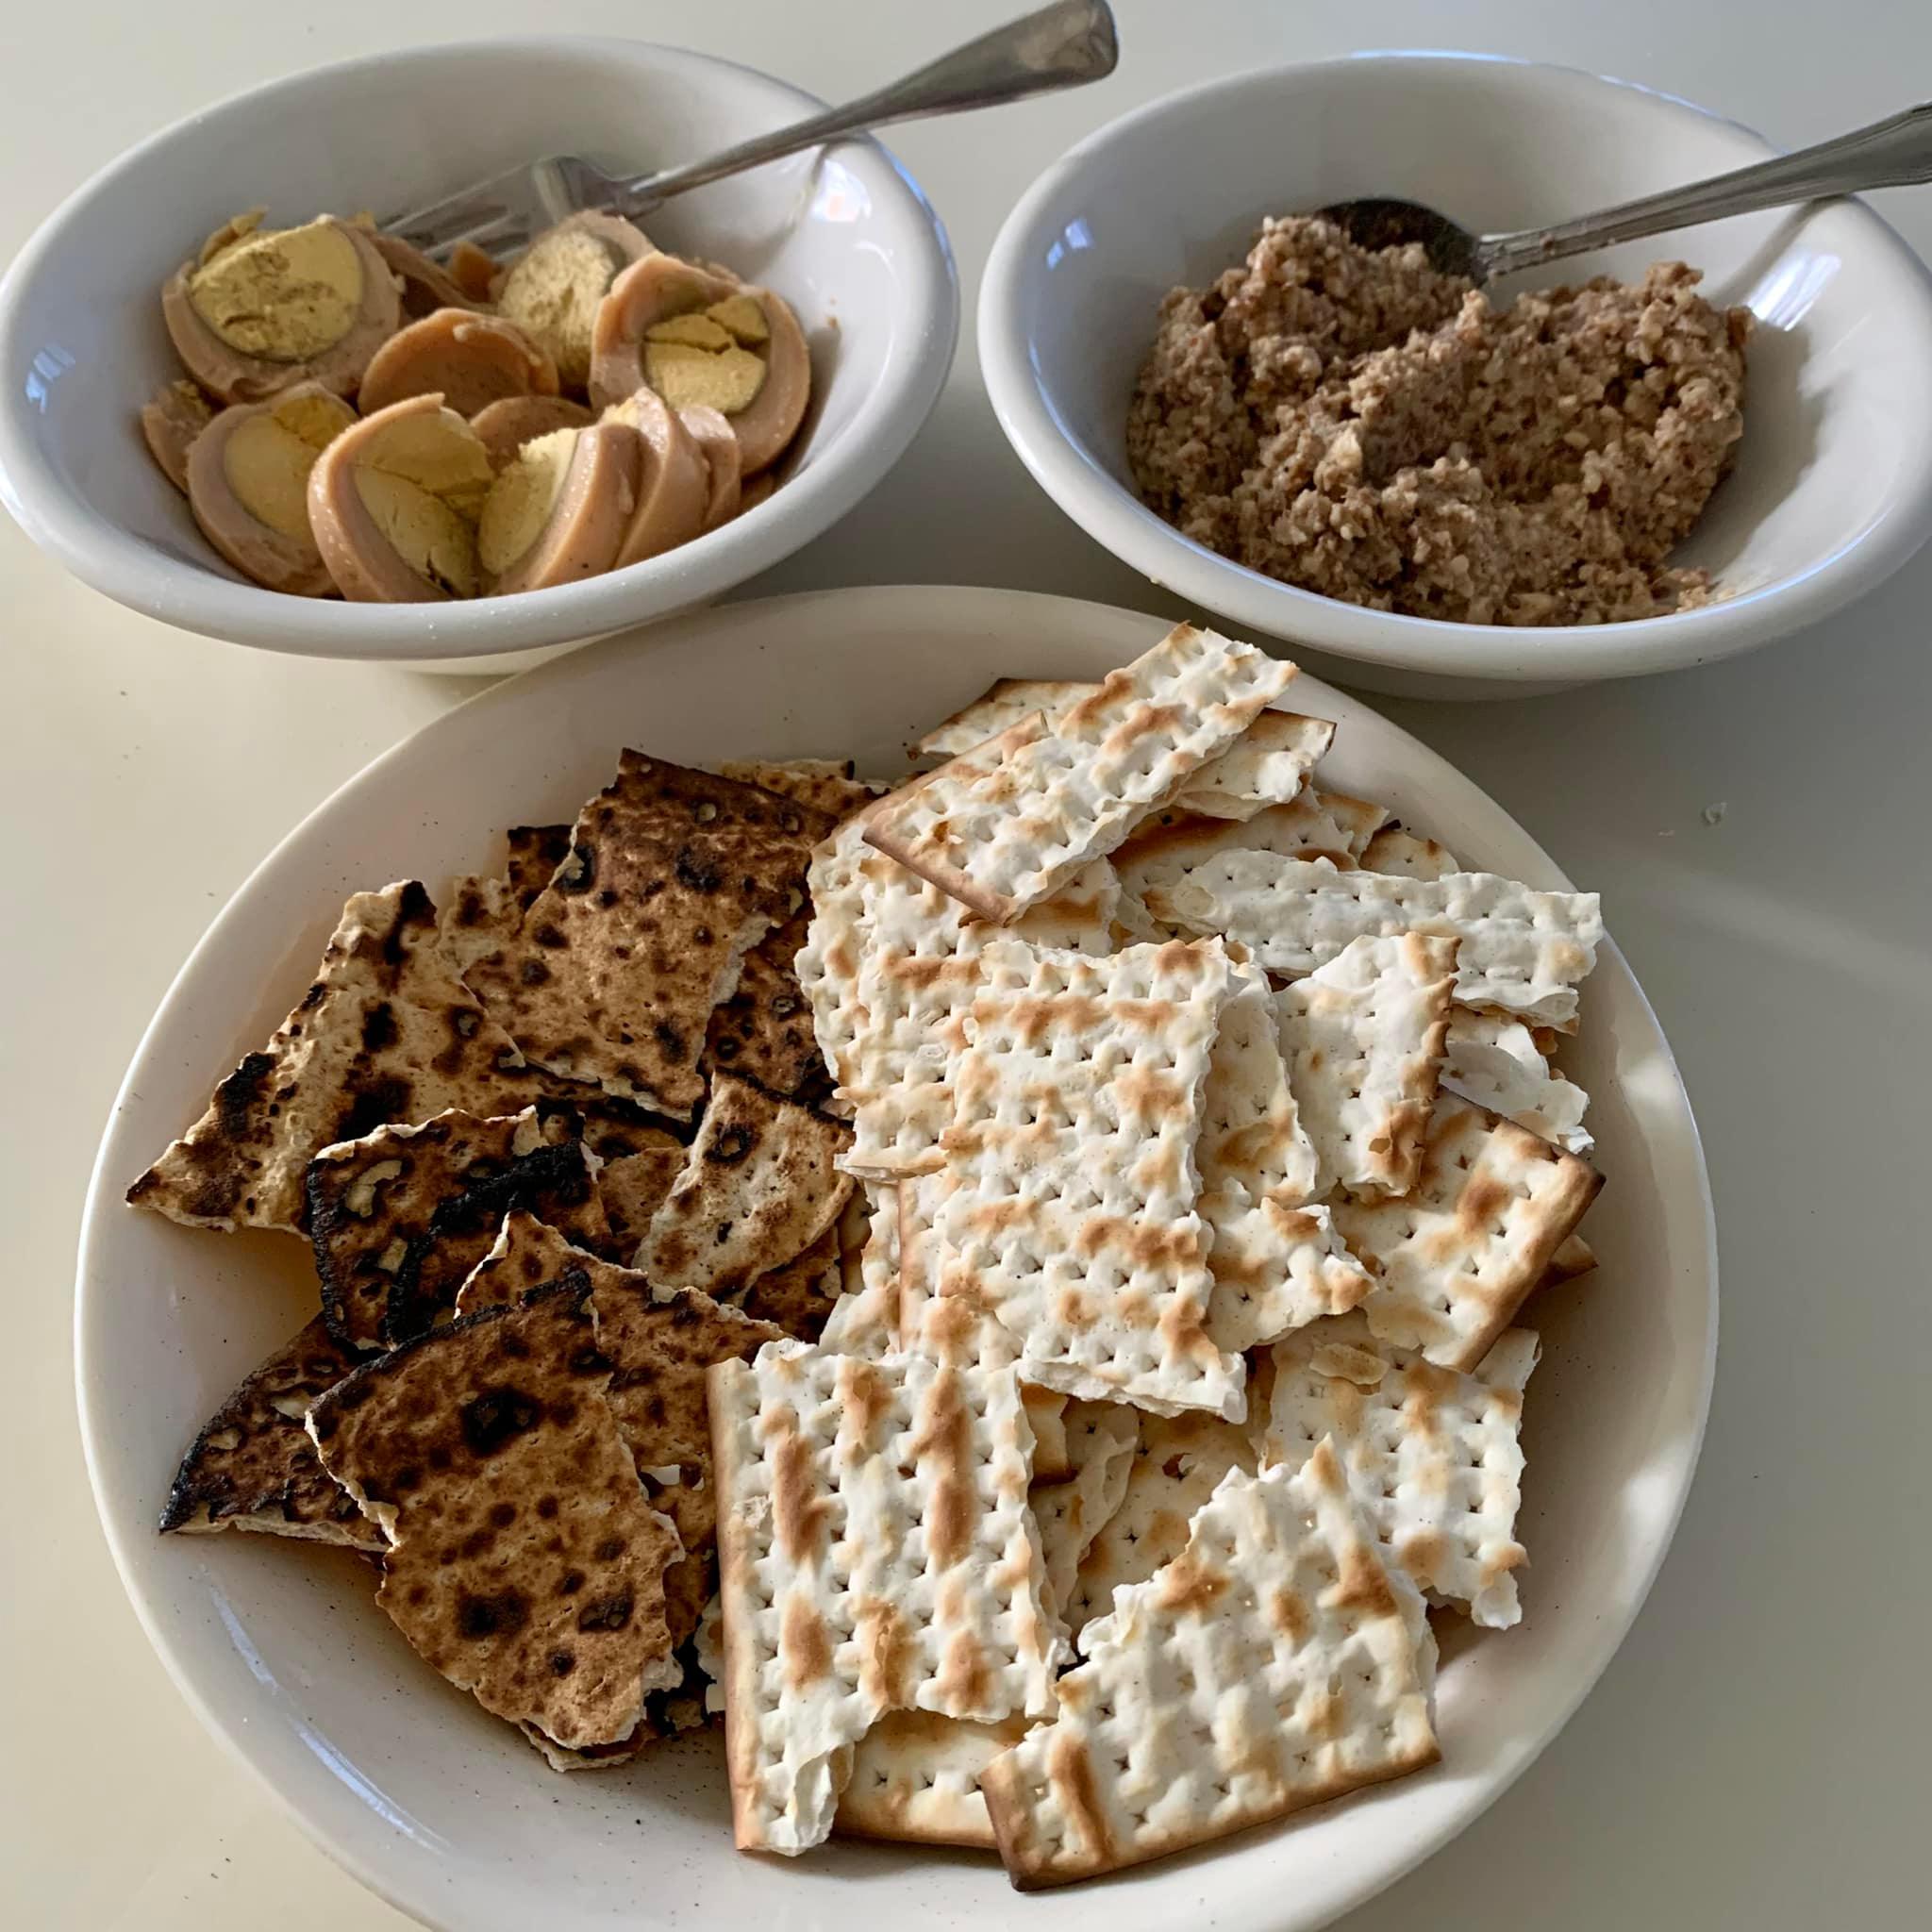 Traditional Passover breakfast items: Matzohs, halegh, and hard-boiled eggs